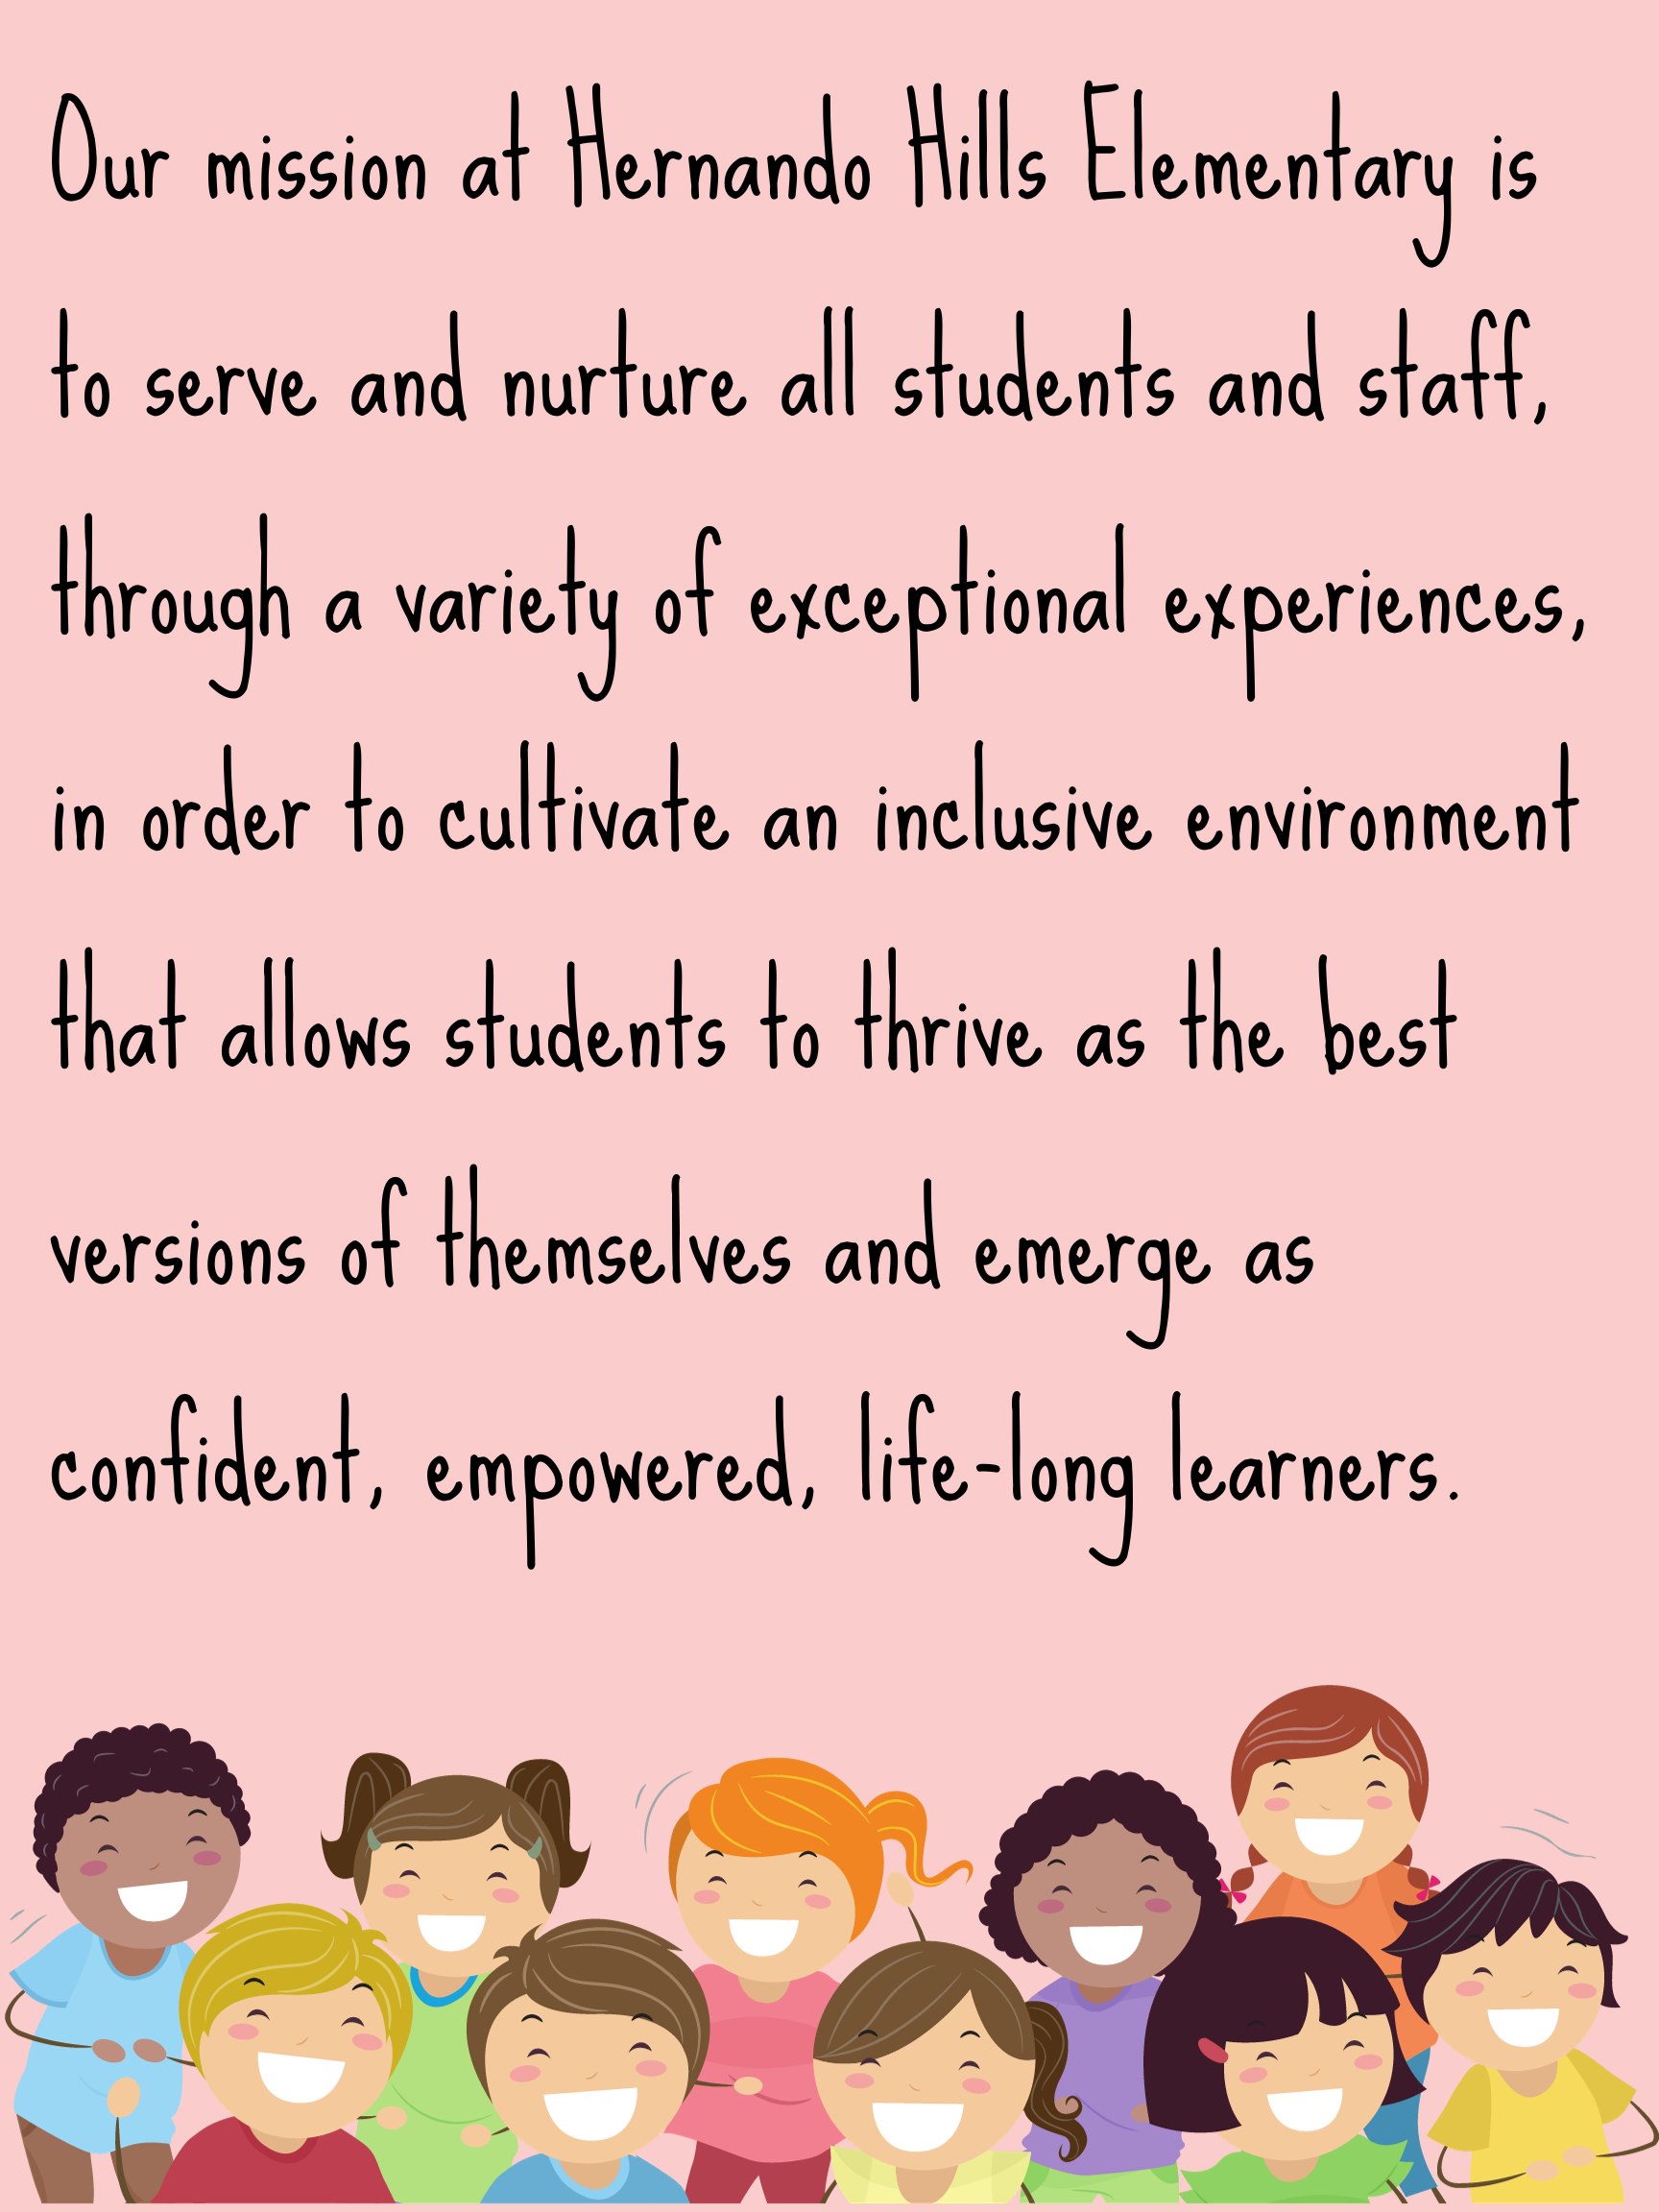 Our mission at Hernando Hills Elementary is to serve and nurture all students and staff, through a variety of exceptional experiences, in order to cultivate and inclusive environment that allows students to thrive as the best version of themselves 